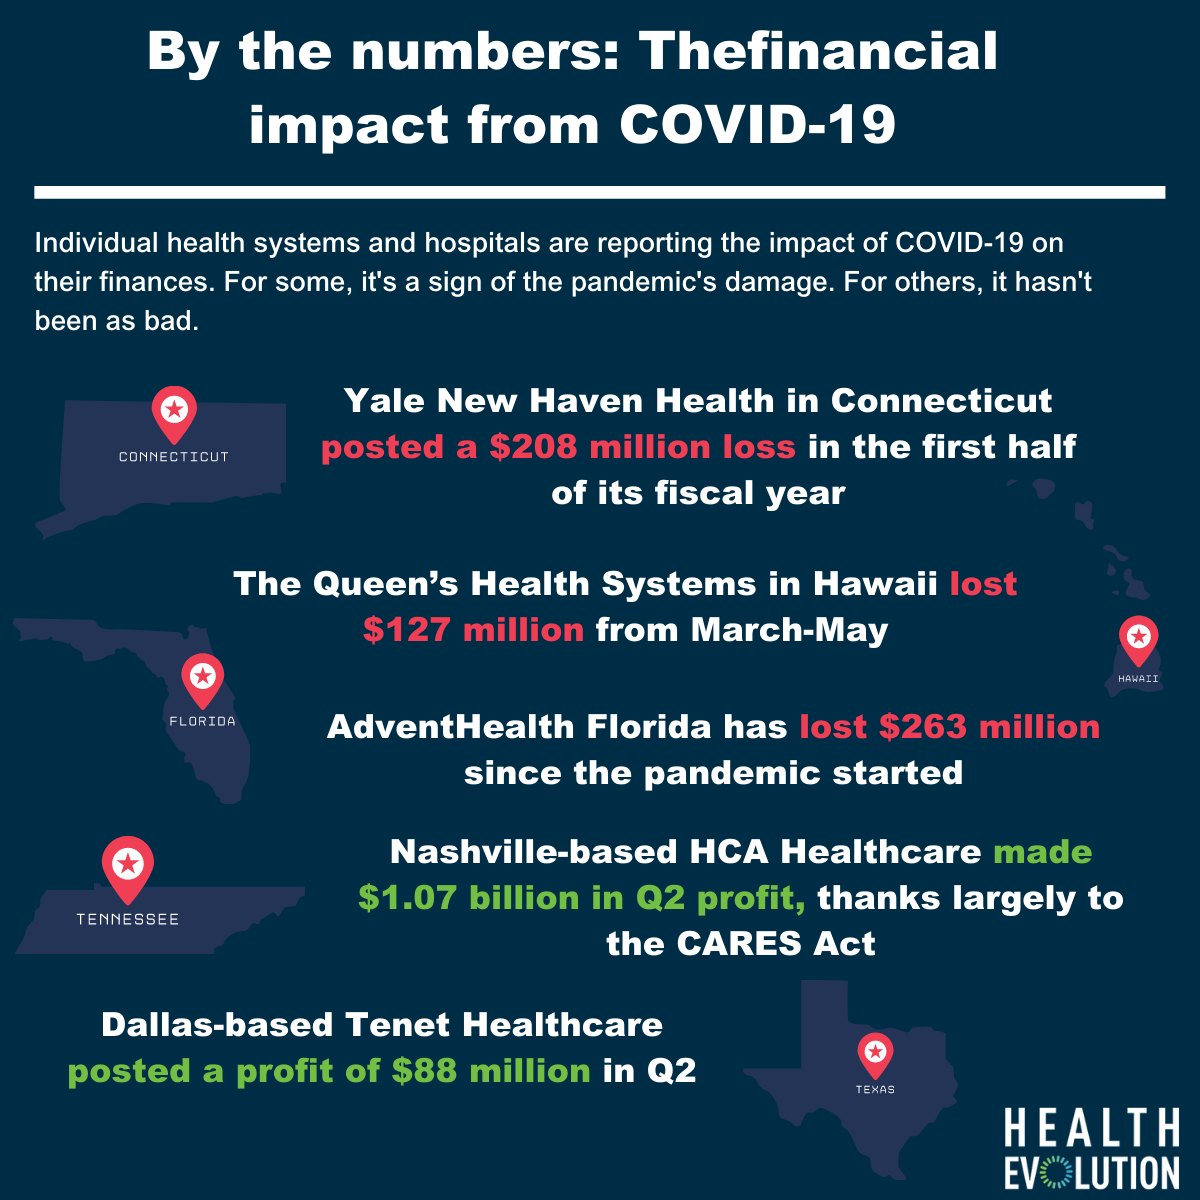 By the numbers: The financial impact from COVID-19